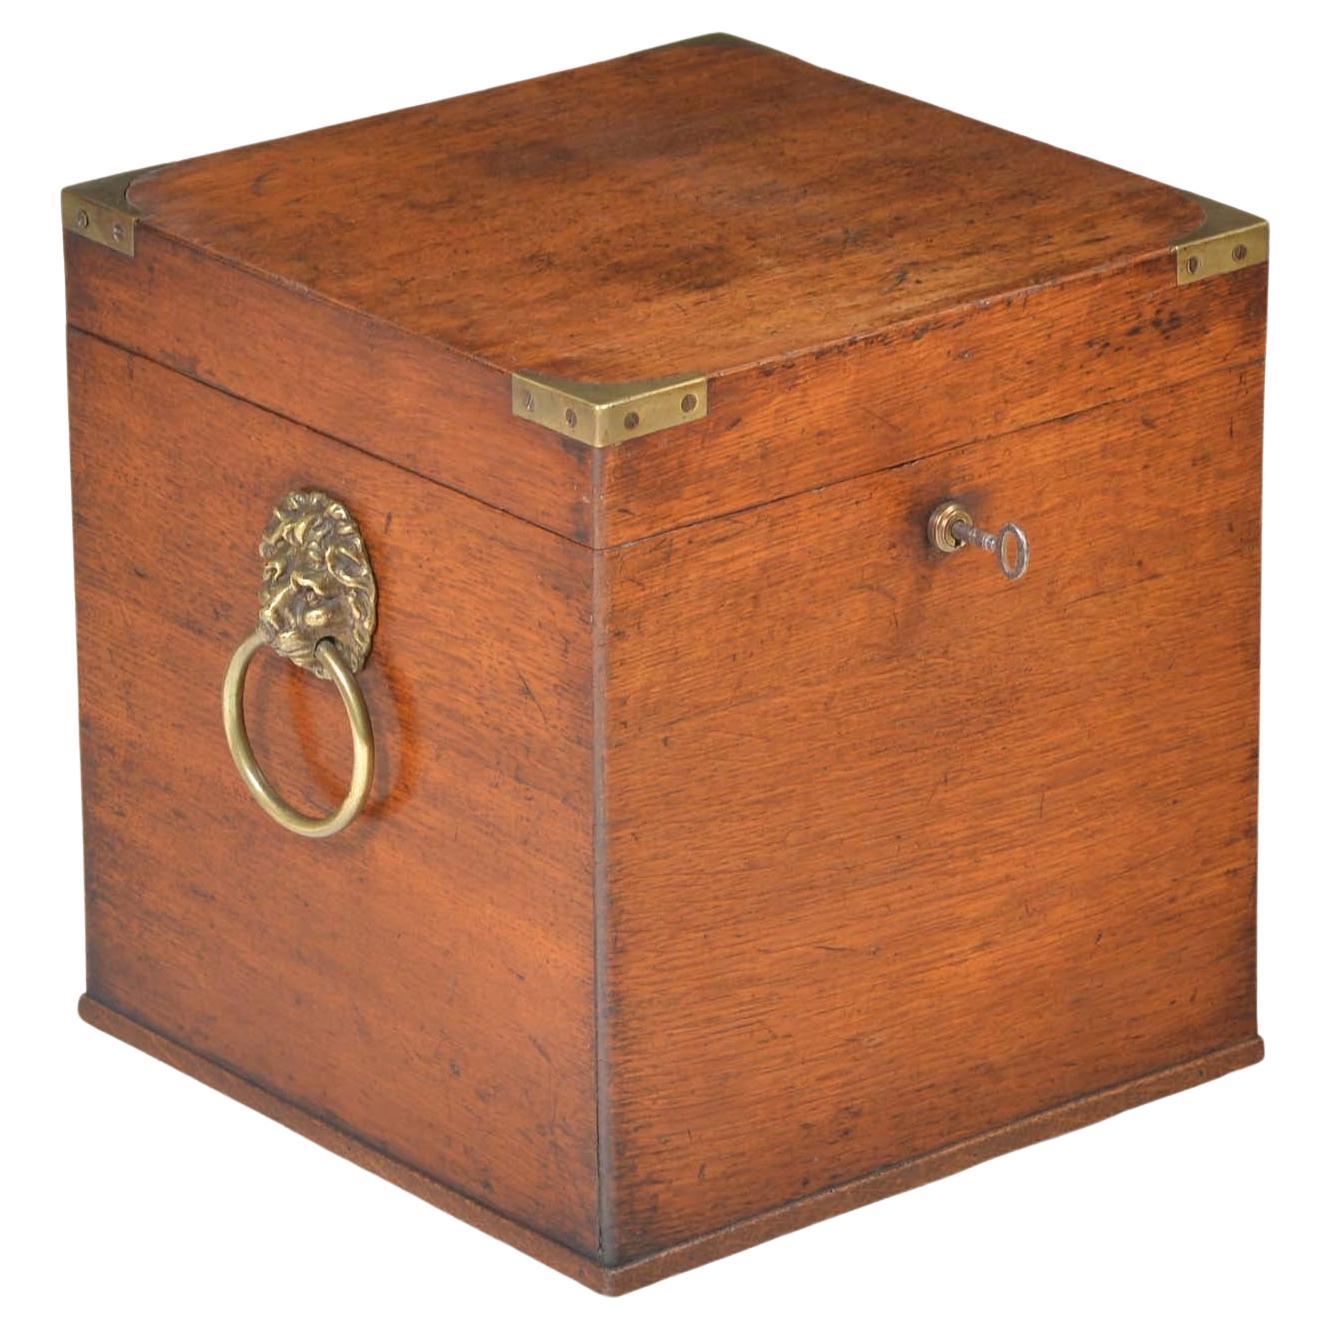 Georgian oak cellarette, the lid with cast brass corner mounts to protect the corners in transit,  opens with Bramah type lock with key, the interior with divisions to accommodate four bottles or decanters. To the sides a pair of cast brass lion’s